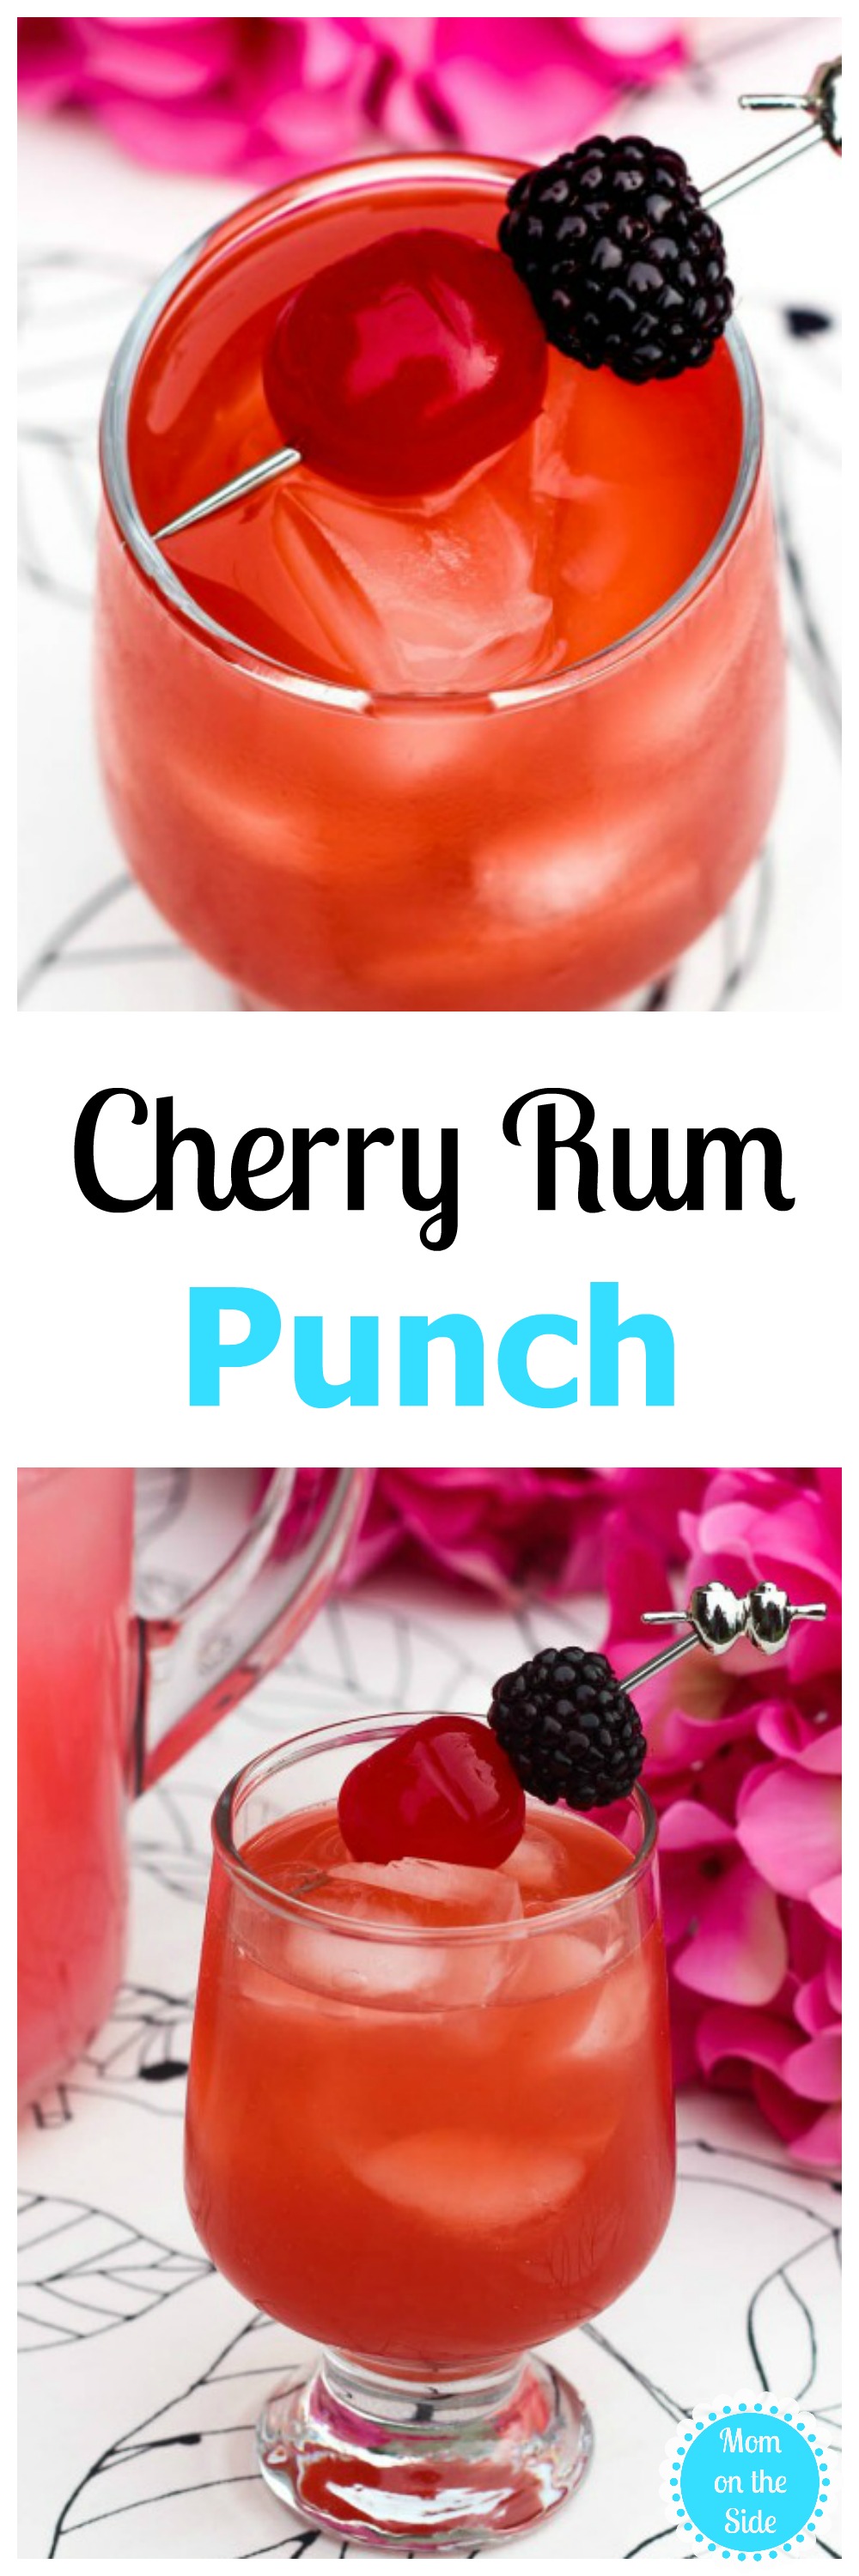 It's a berry cherry Thirsty Thursday on Mom on the Side! If you're hosting a party, or squeezing in me time, give this Cherry Rum Punch a try.